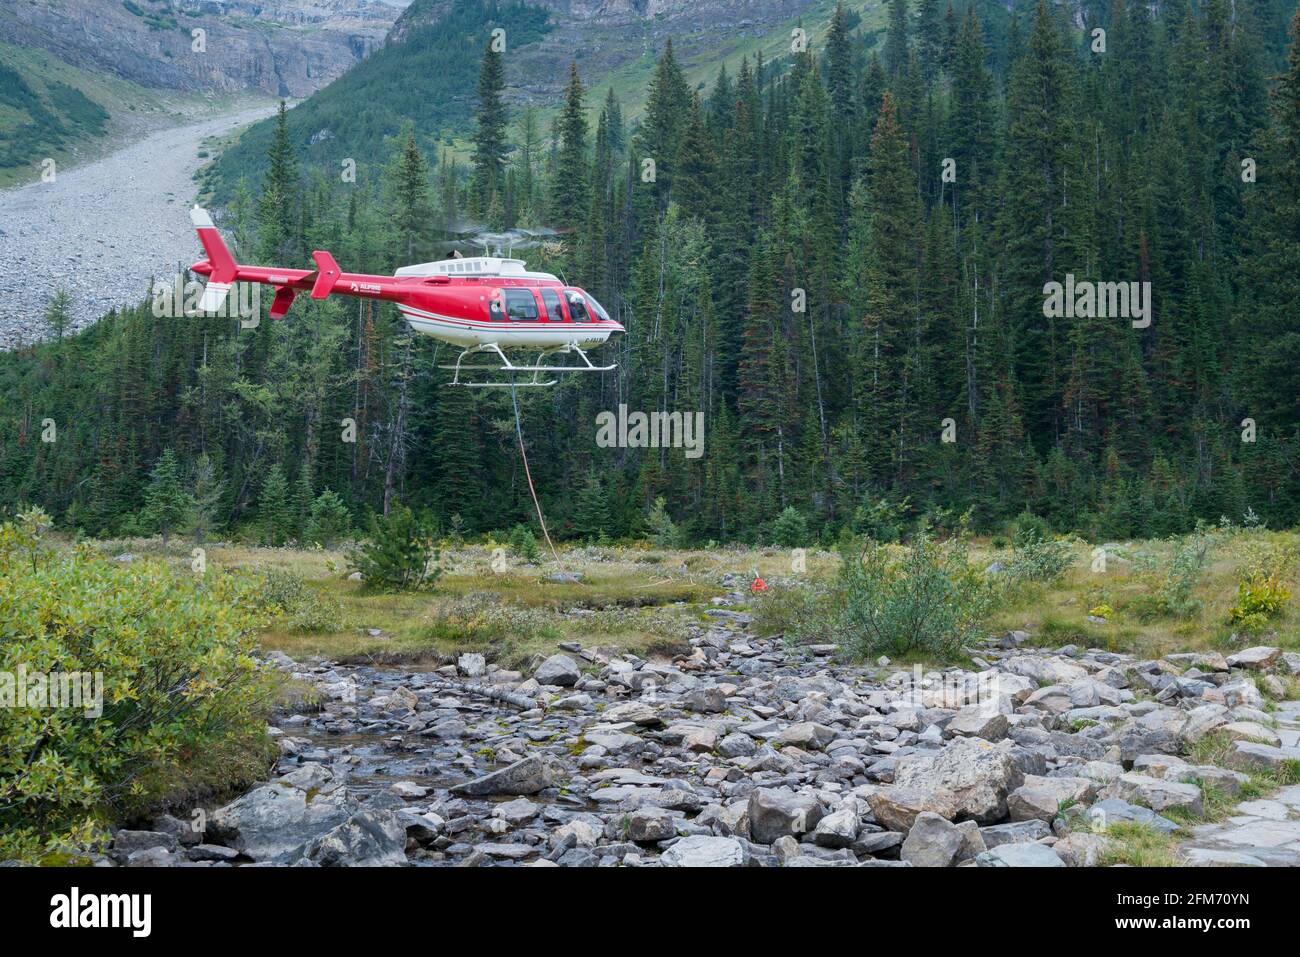 Banff, Canada - 08.30.2018: Red and blue Alpine helicopter going to touch down in a meadow in Canadian Rockies. Service for Plain of Six Glaciers Tea Stock Photo